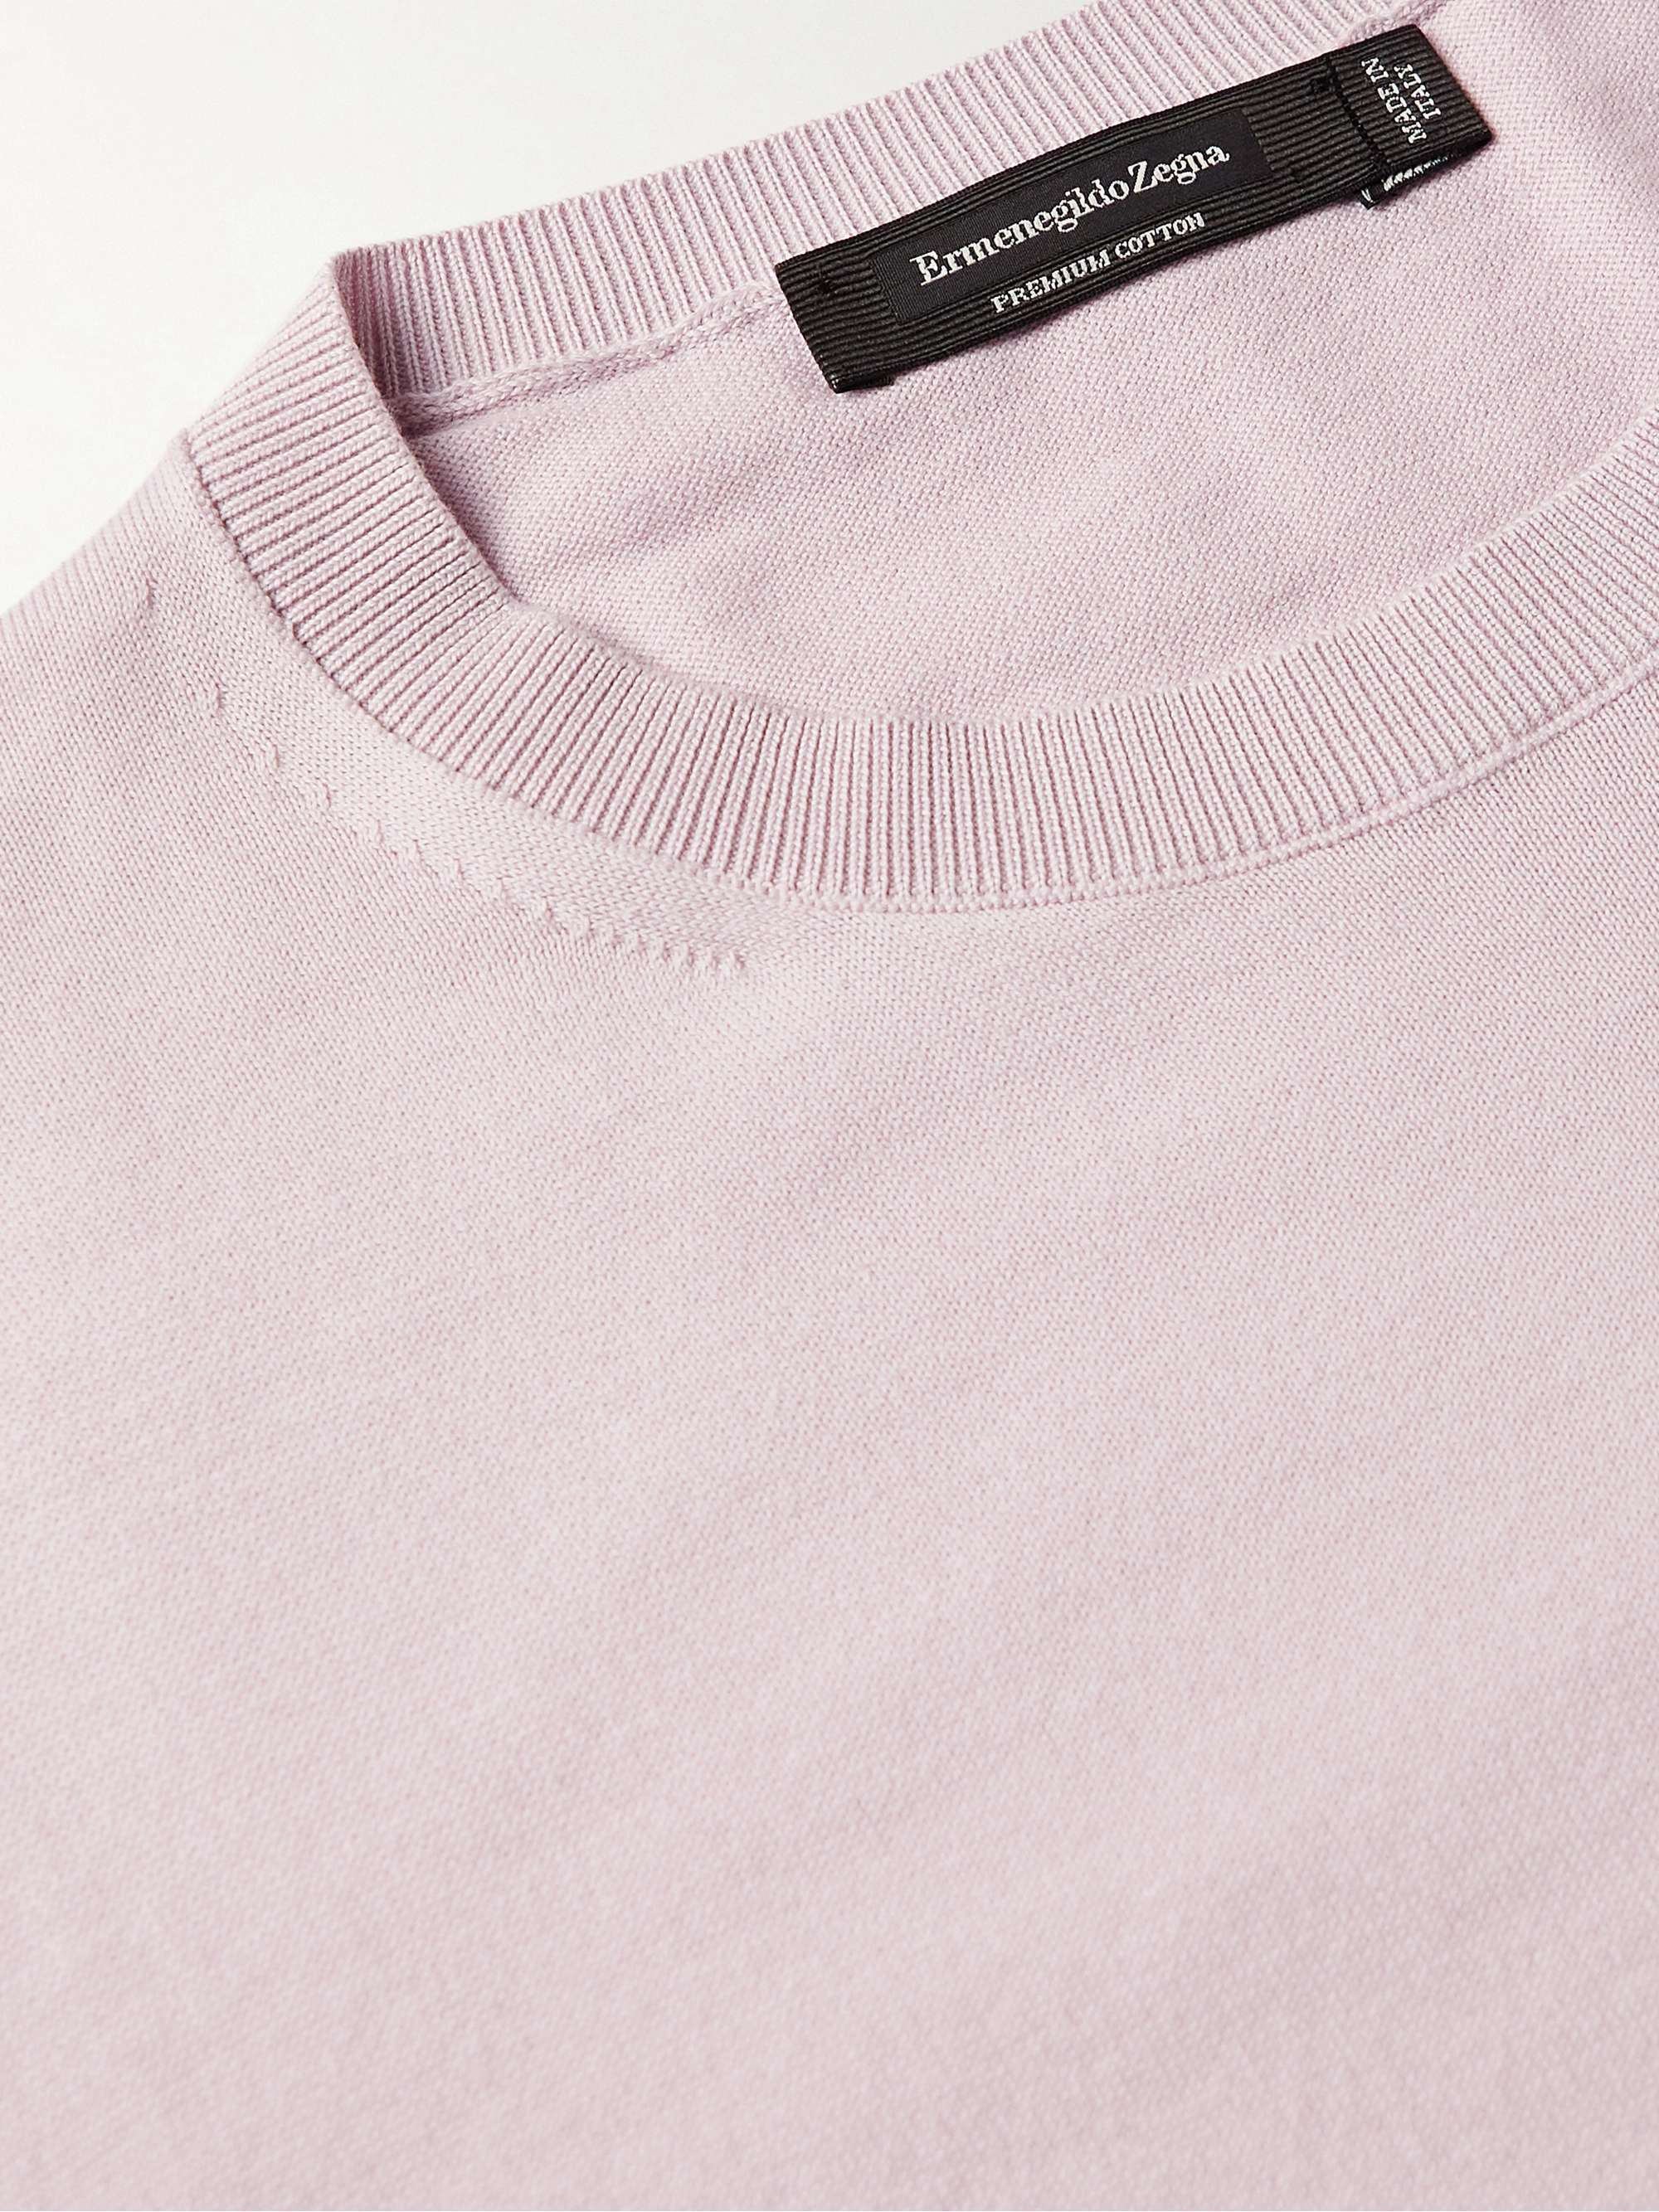 ZEGNA Logo-Embroidered Cotton Sweater